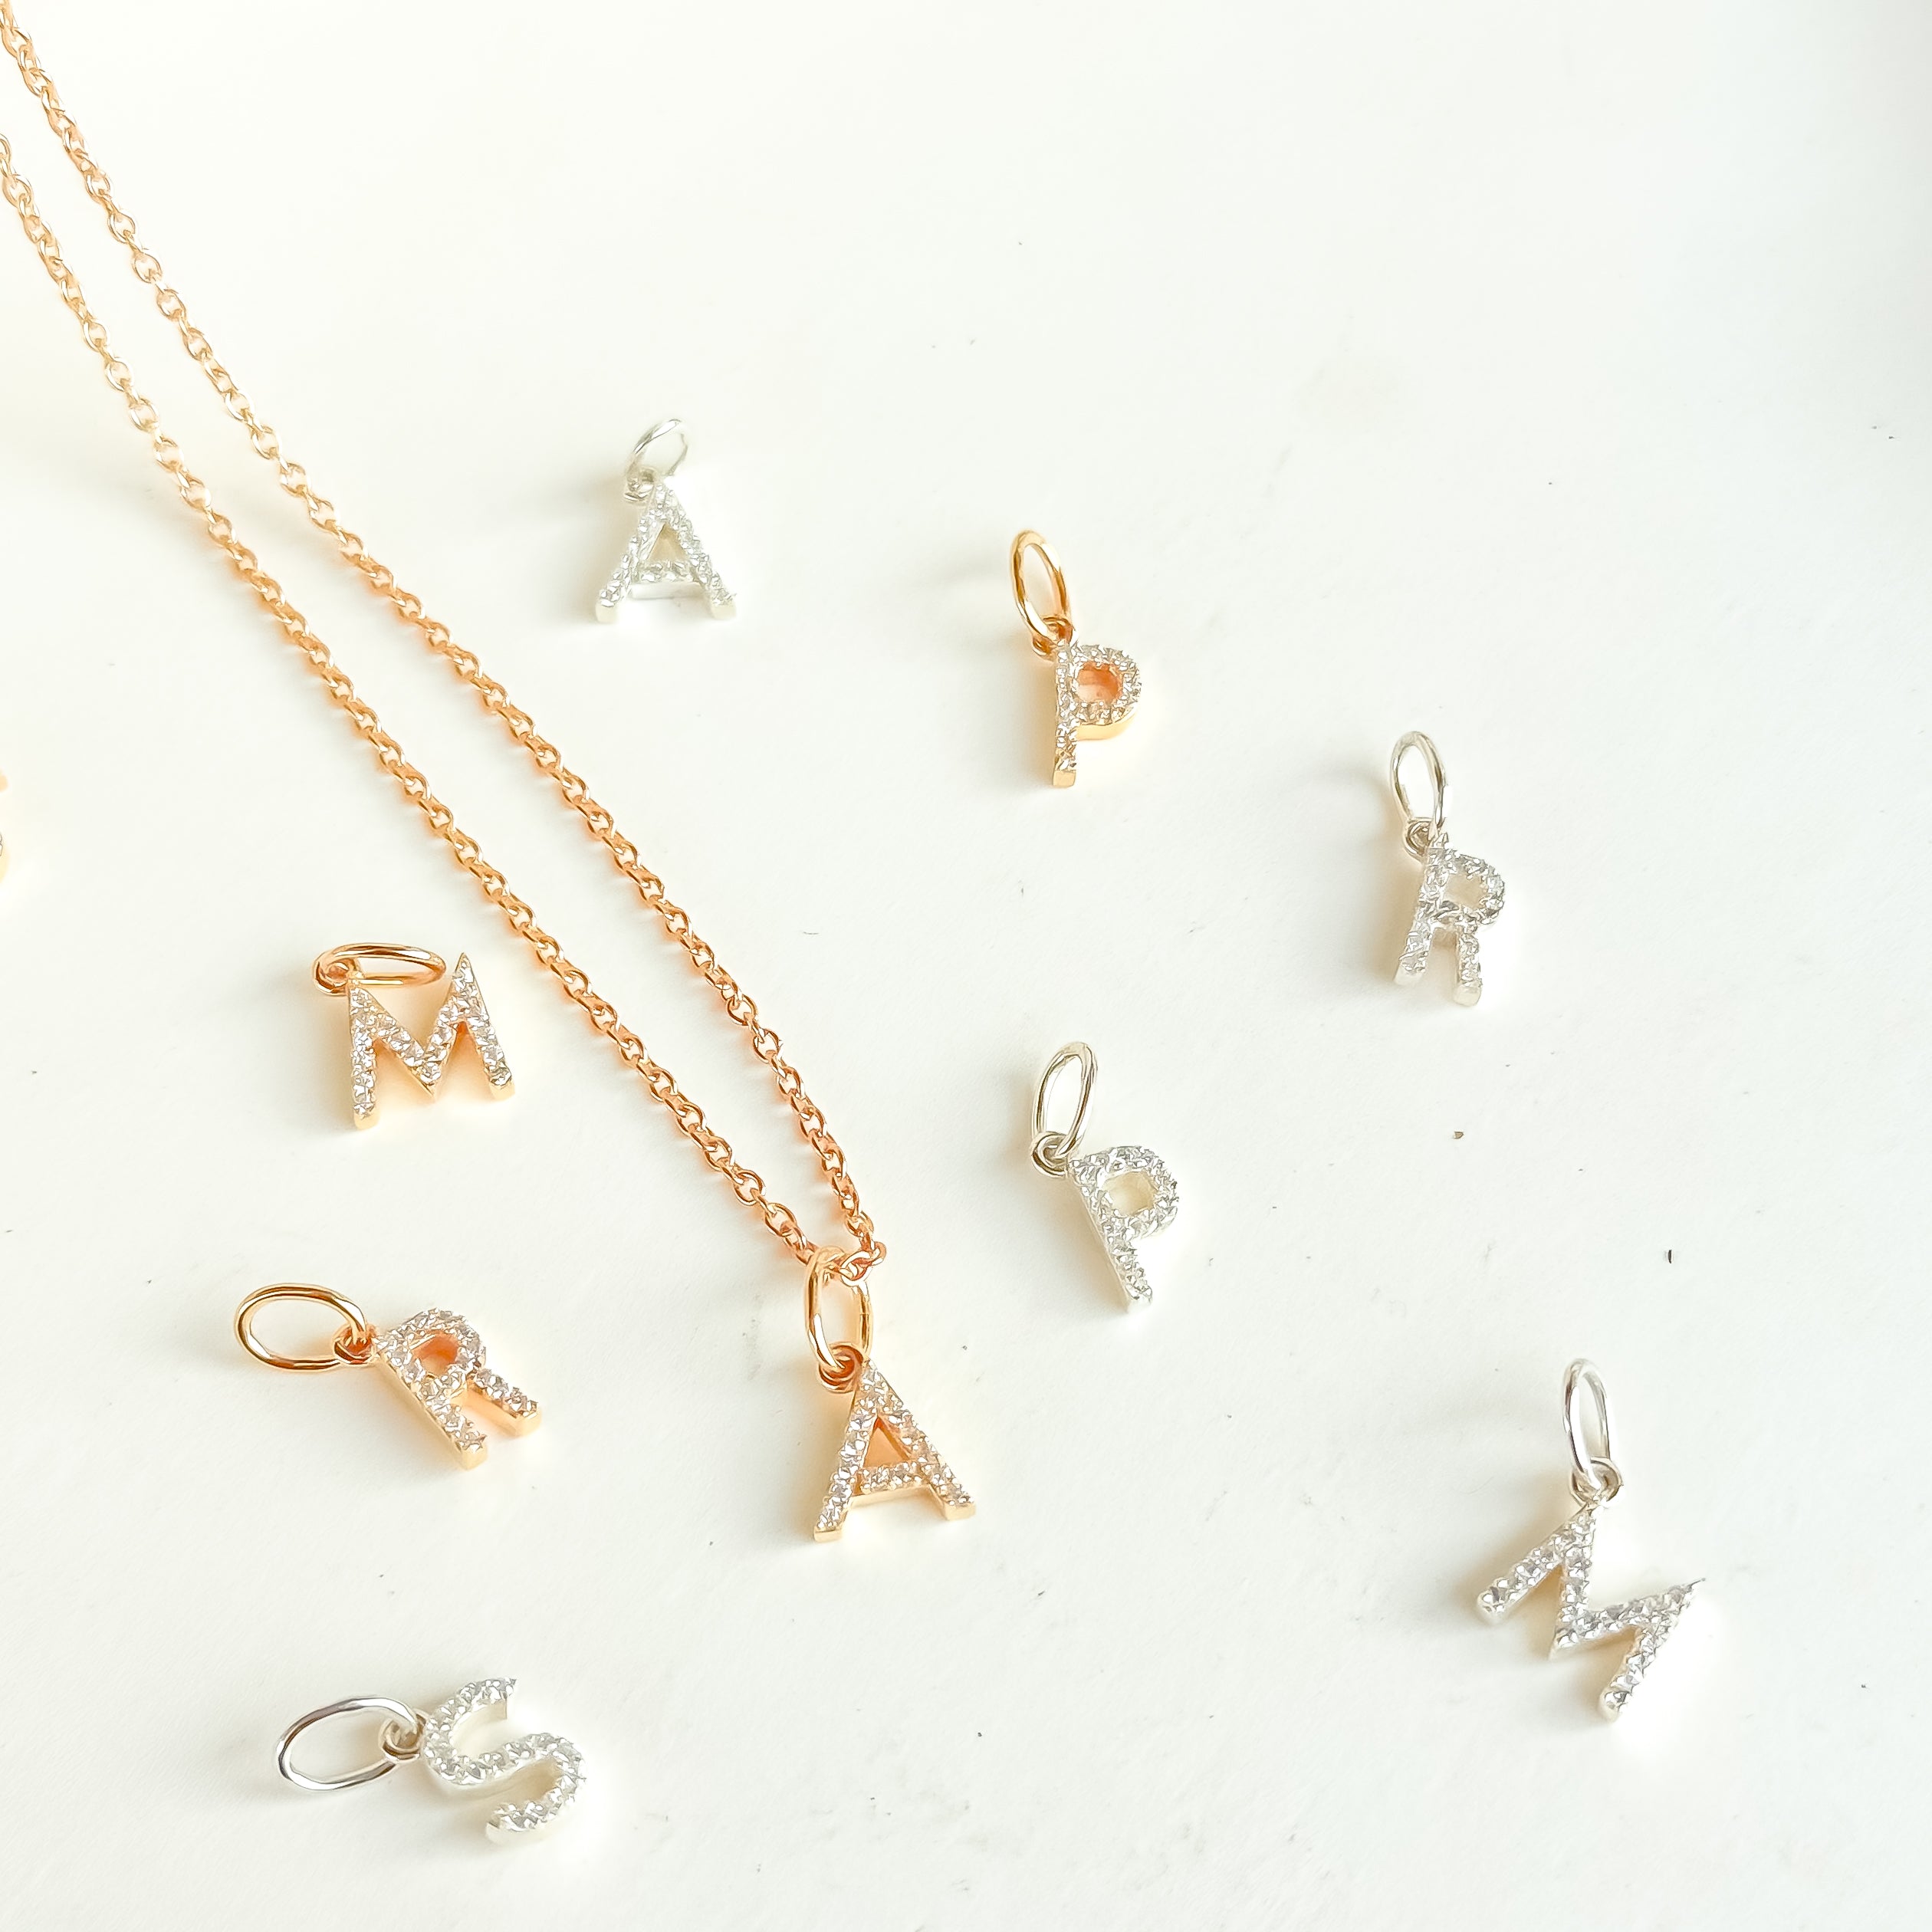 Initial Letter Necklace - Octonov 